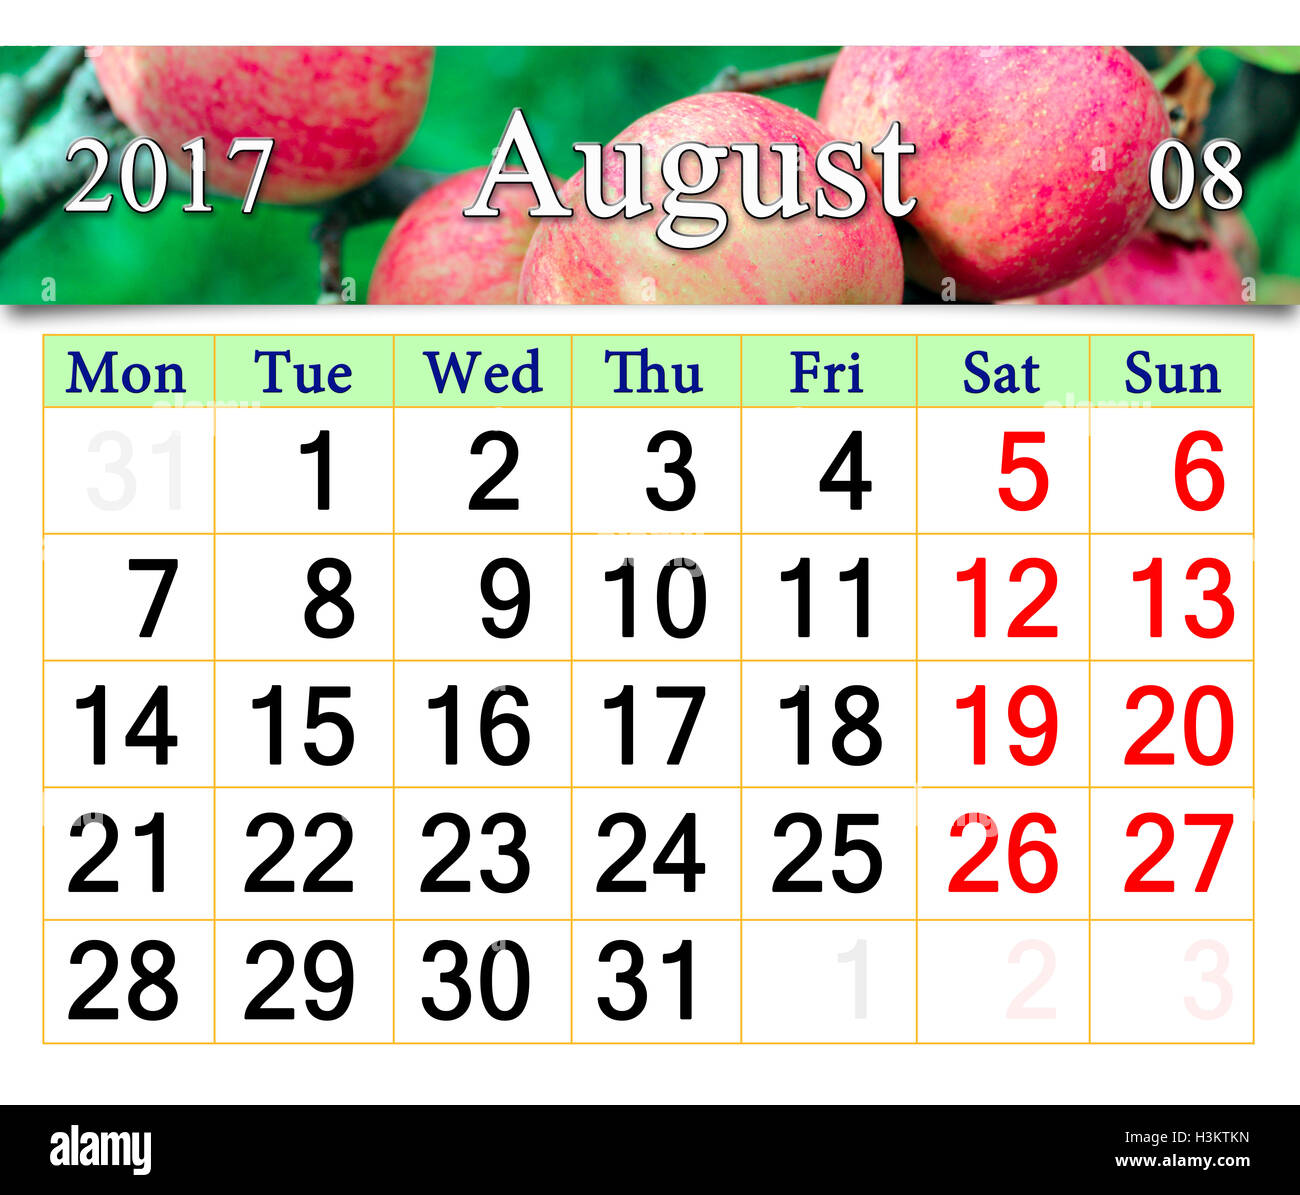 beautiful-calendar-for-august-2017-year-with-ripe-apples-on-the-branch